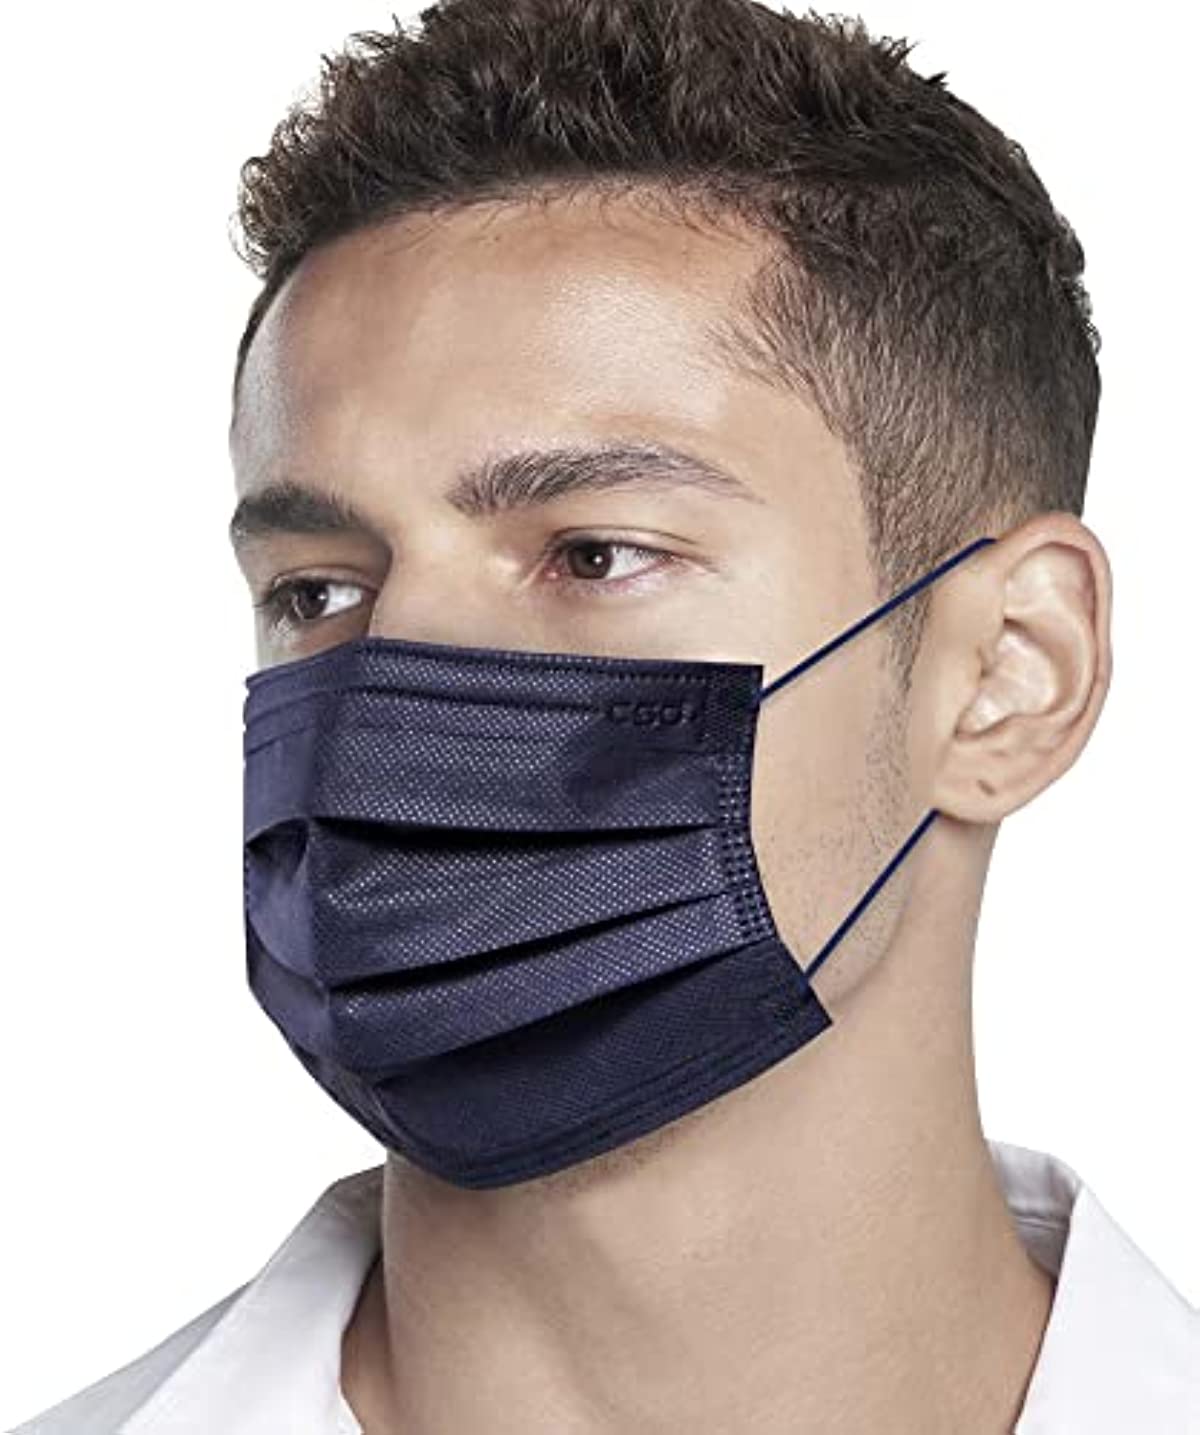 CSD Colo Mood Disposable Face Mask, 3 Ply Filter Protection with Colored Elastic Earloop, Breathable and Fashionable for Adult, Dark Denim 30 Pcs/Box